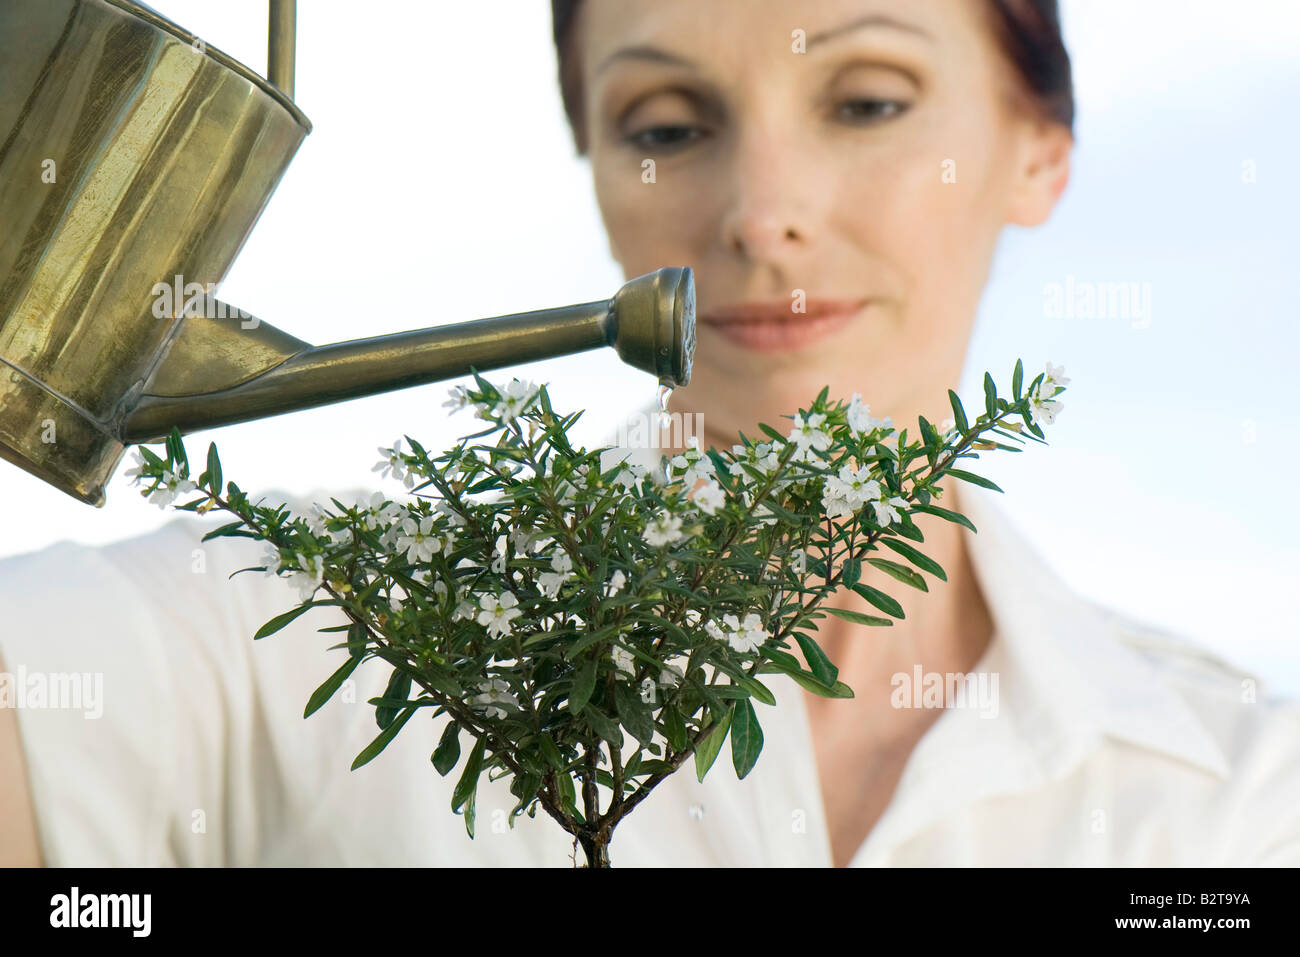 Mature woman watering plant Stock Photo